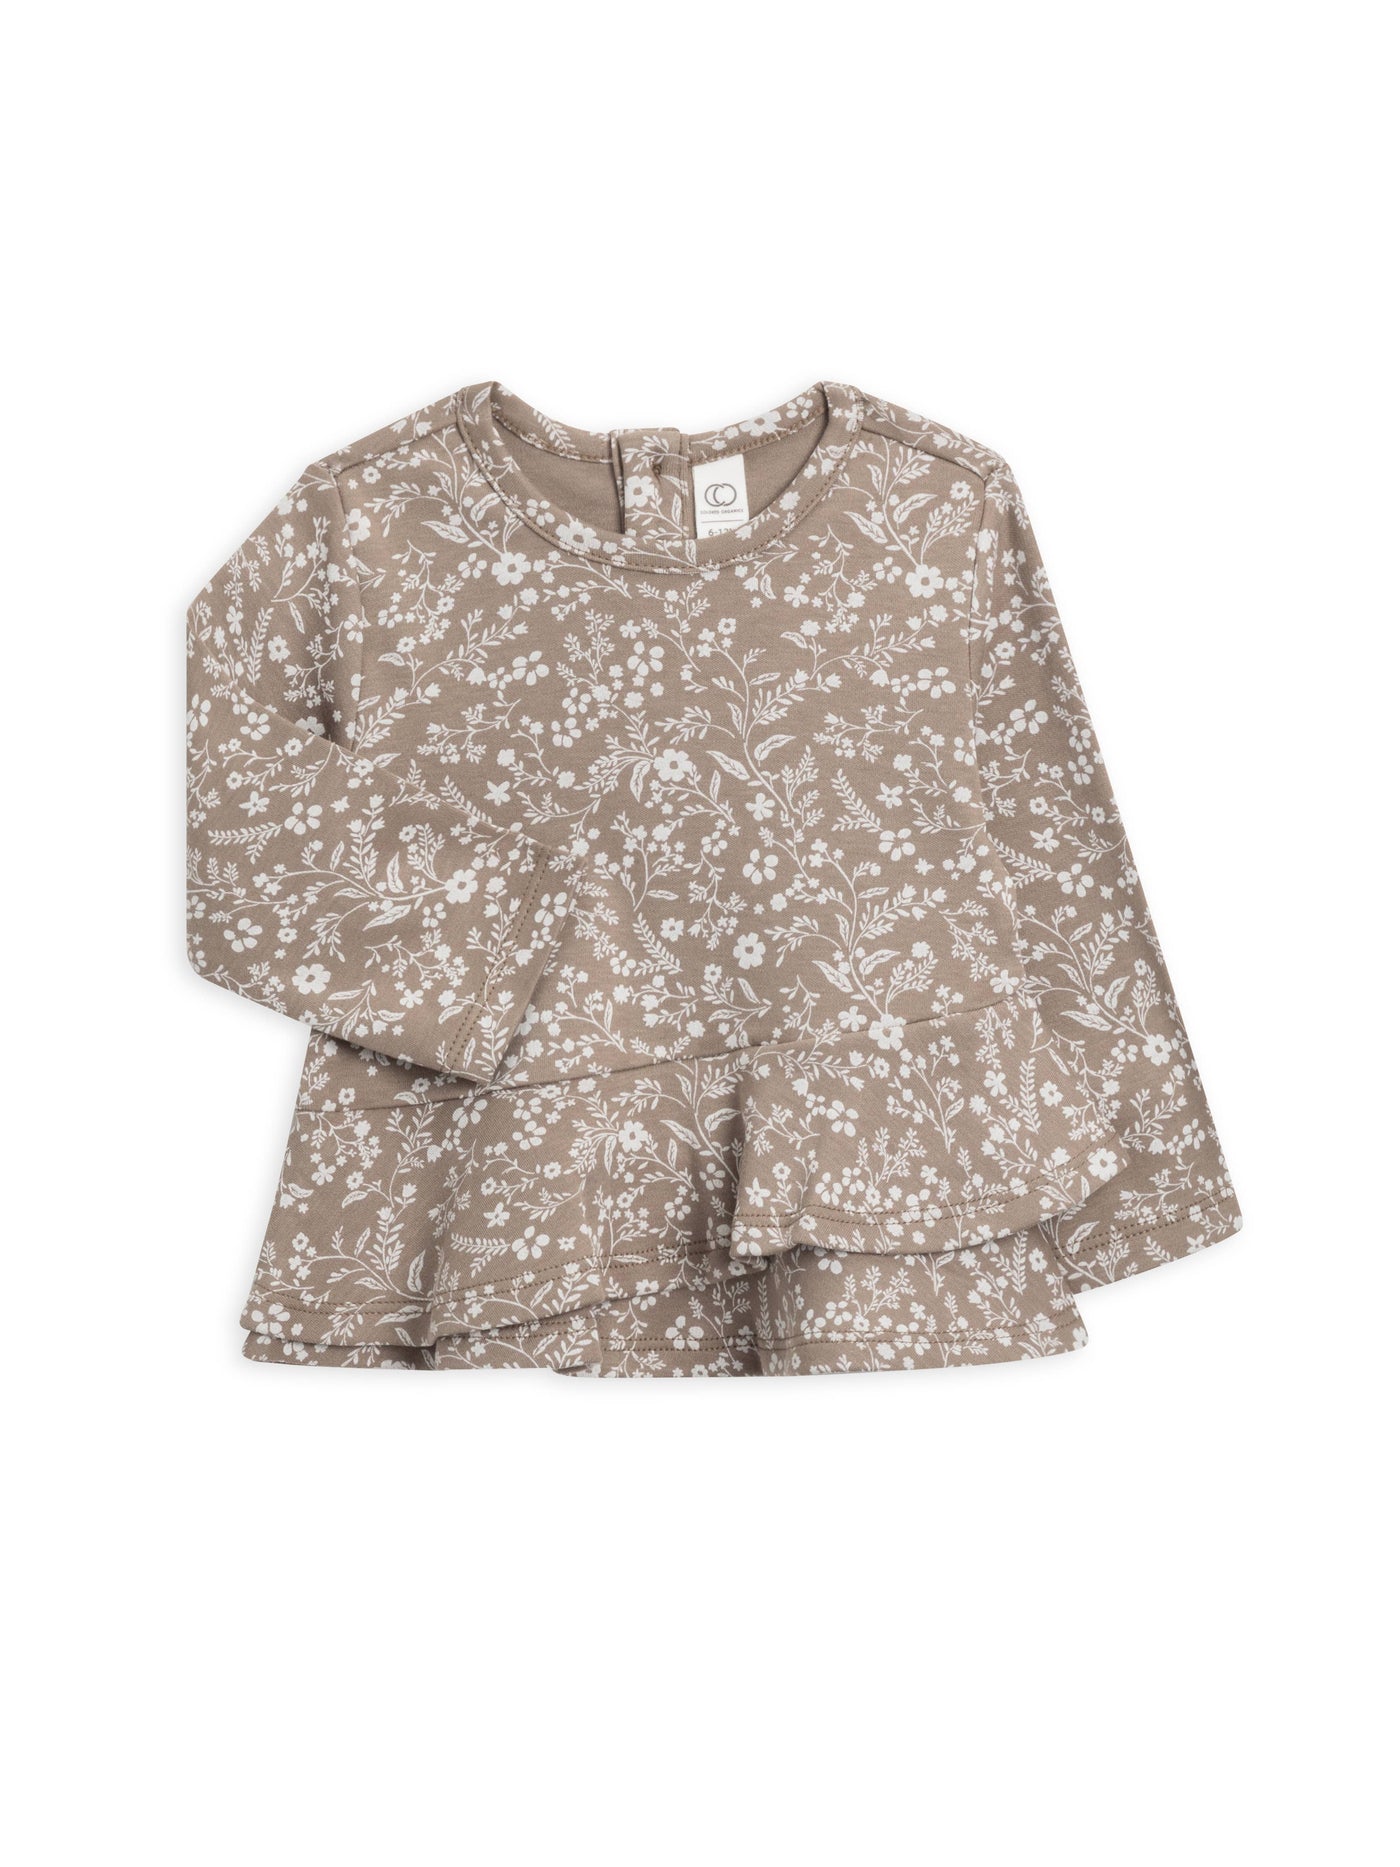 Colored Organics Organic Baby&Kids Edith Top - Hailey Floral / Driftwood - Simple Good